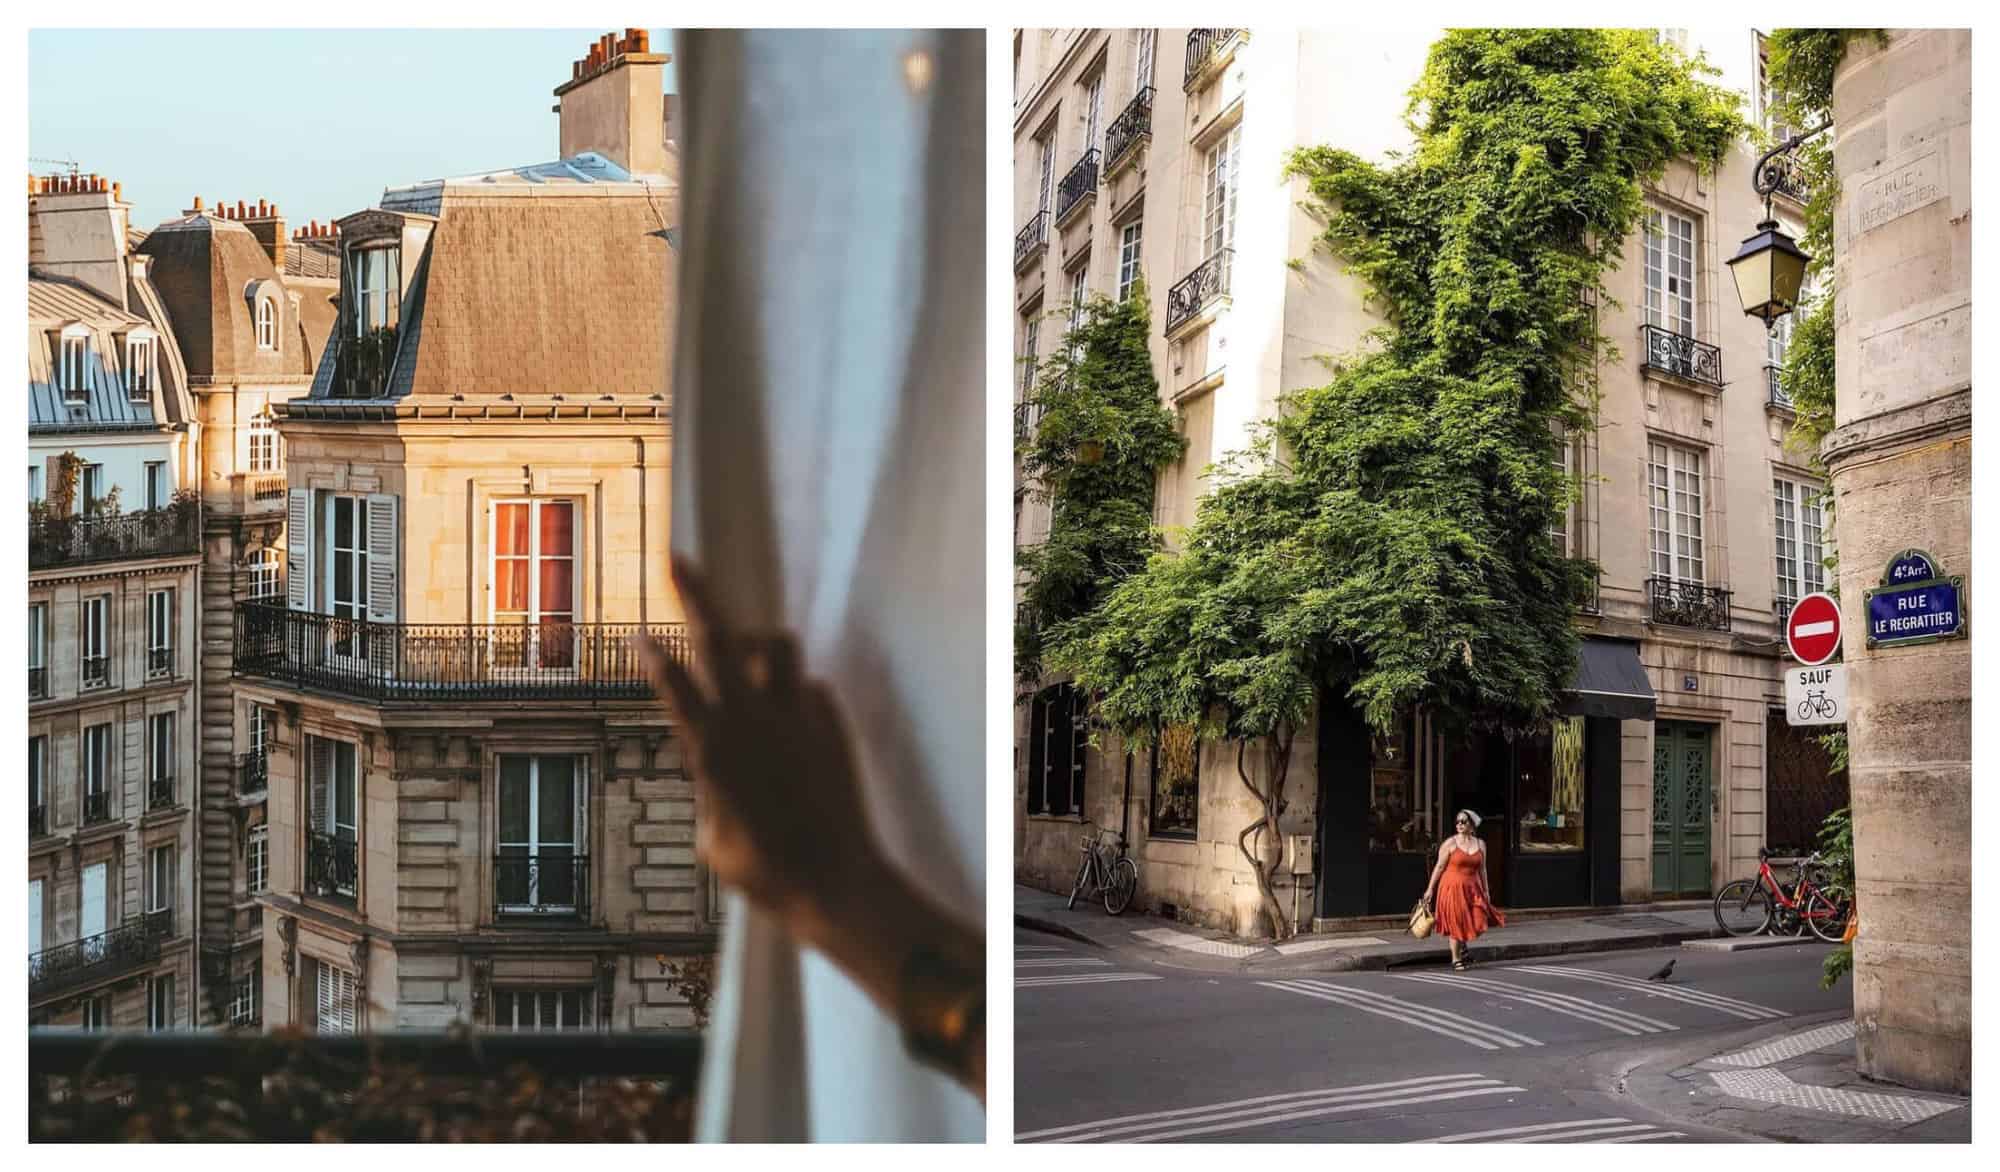 Left: A woman looks outside of a window across the street at another Parisian apartment. Right: A woman in a red dress is pictured walking on a quiet Parisian street